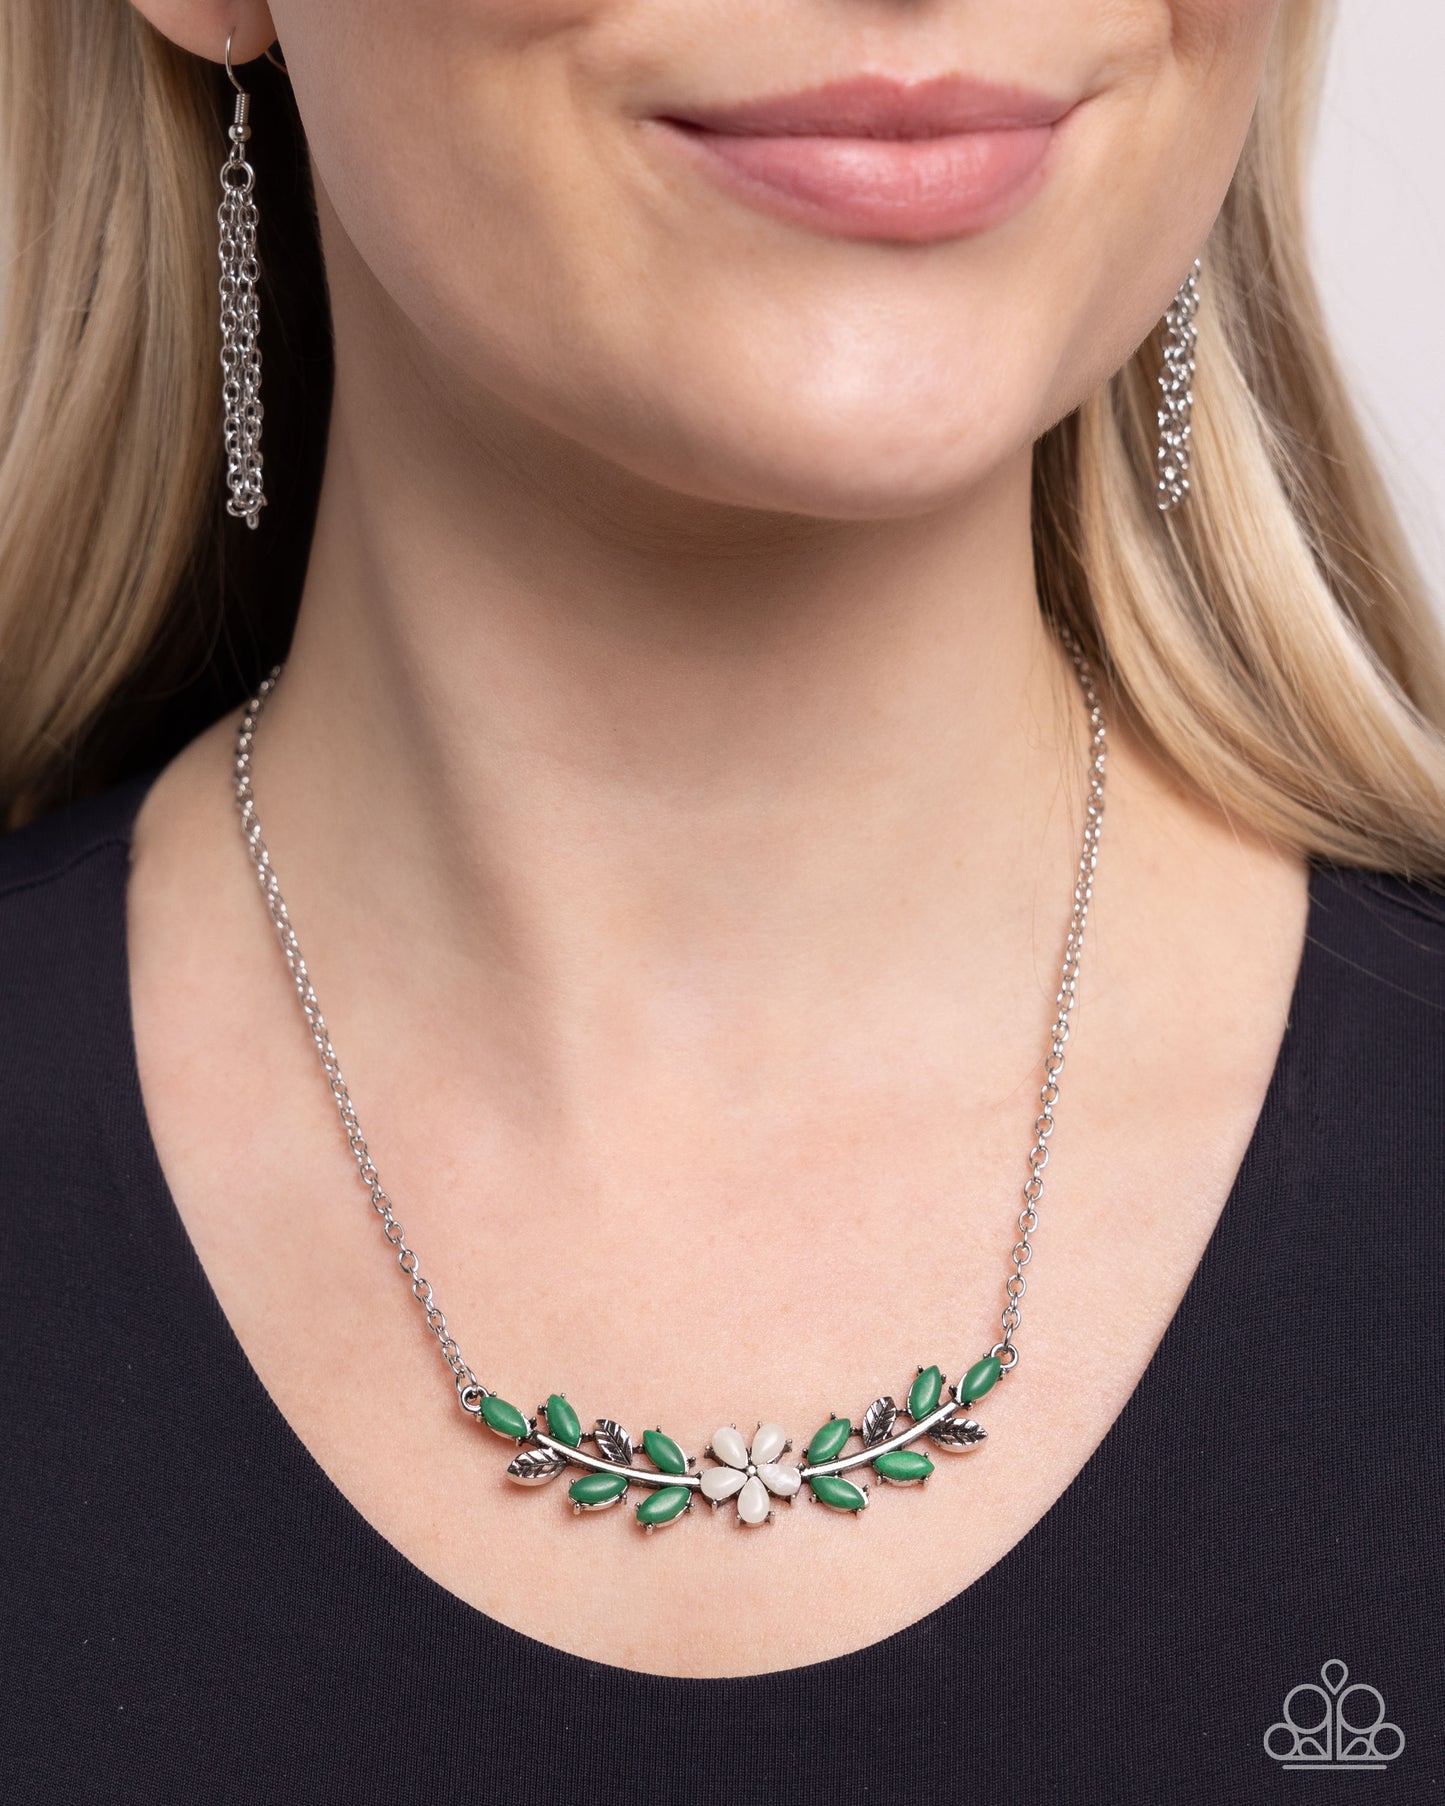 Leafy Layover - White Bead Flower/Green Bead Leaves Paparazzi Necklace & matching earrings